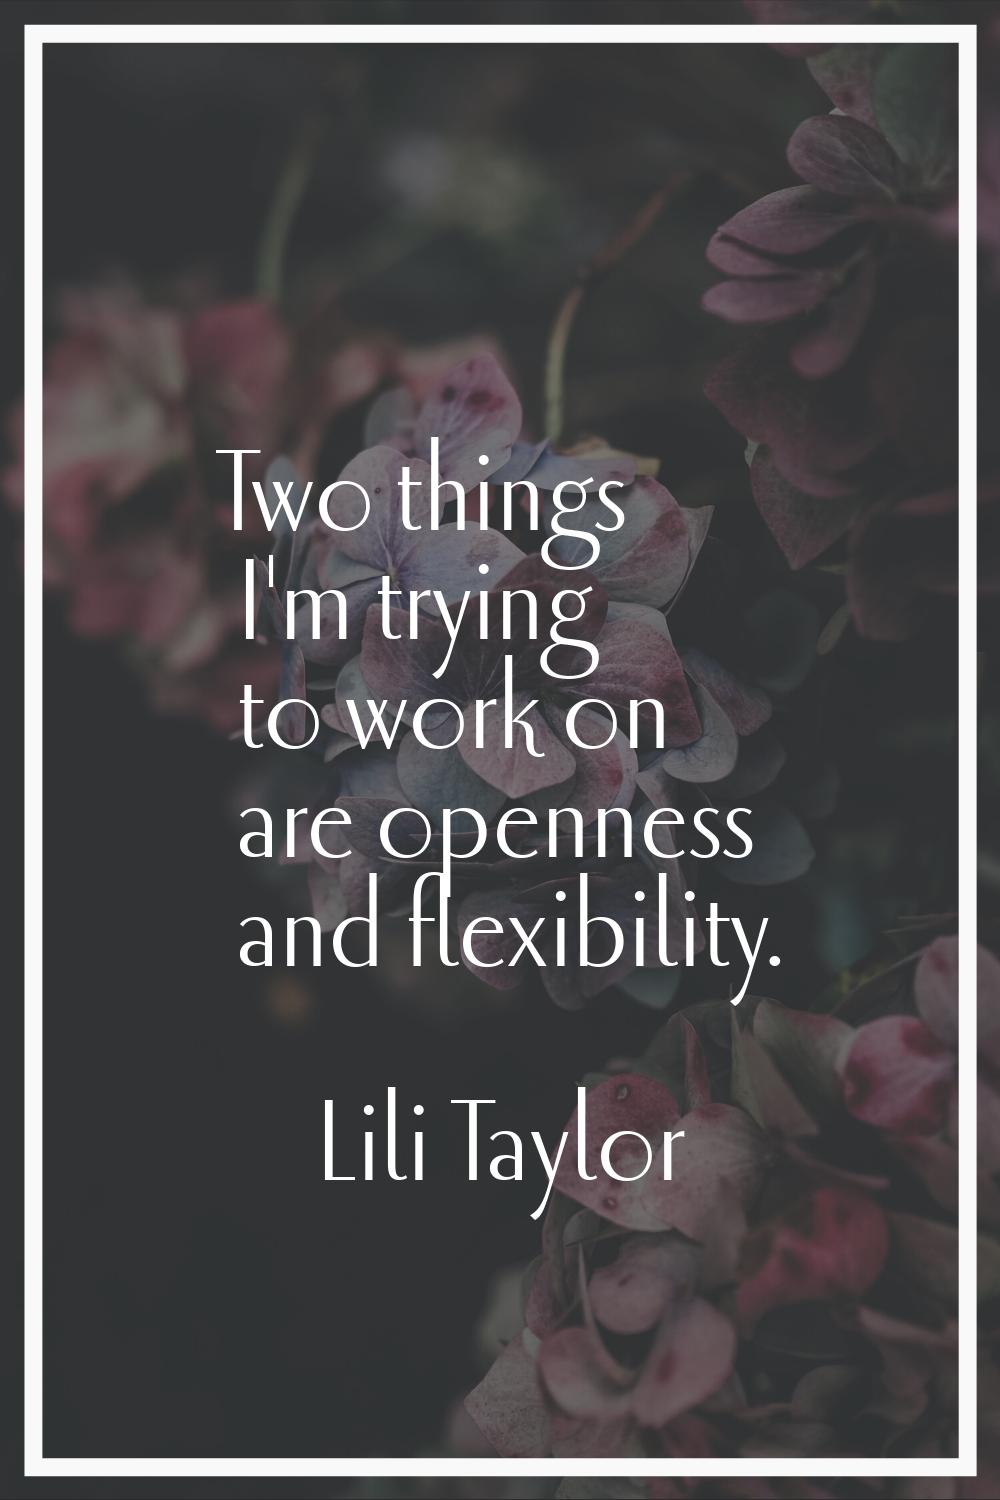 Two things I'm trying to work on are openness and flexibility.